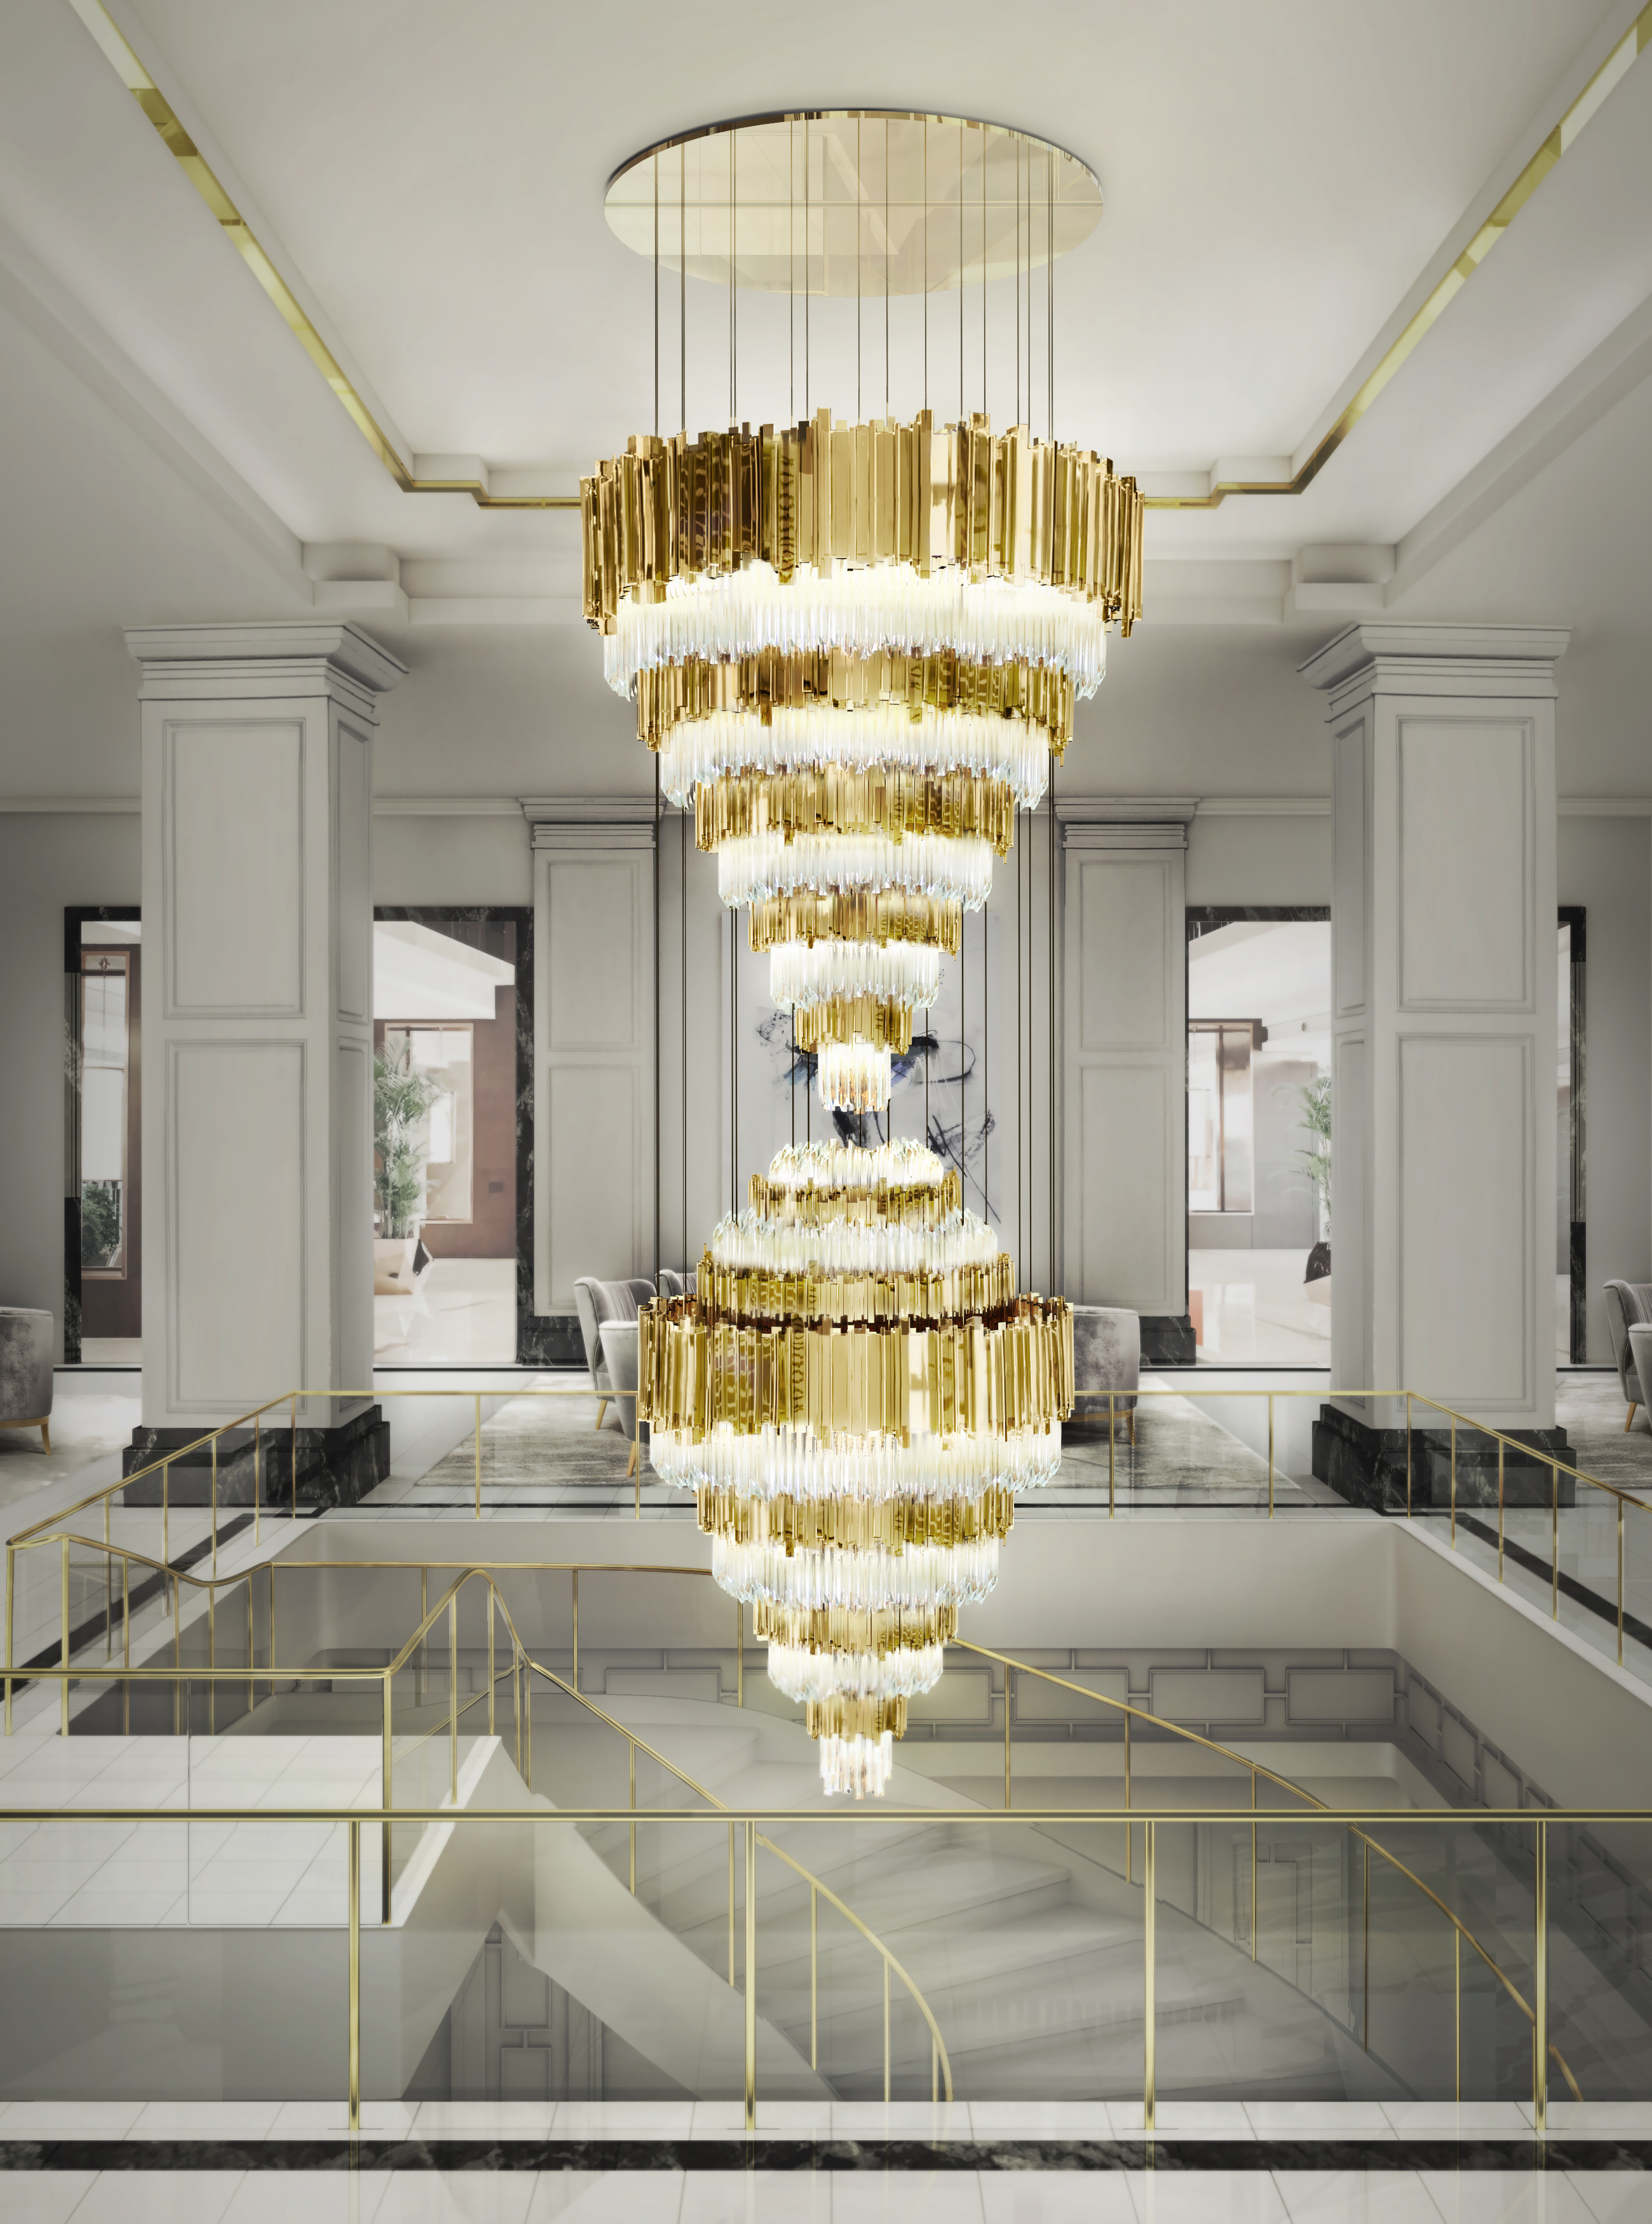 Product Of The Week: Empire XL Chandelier